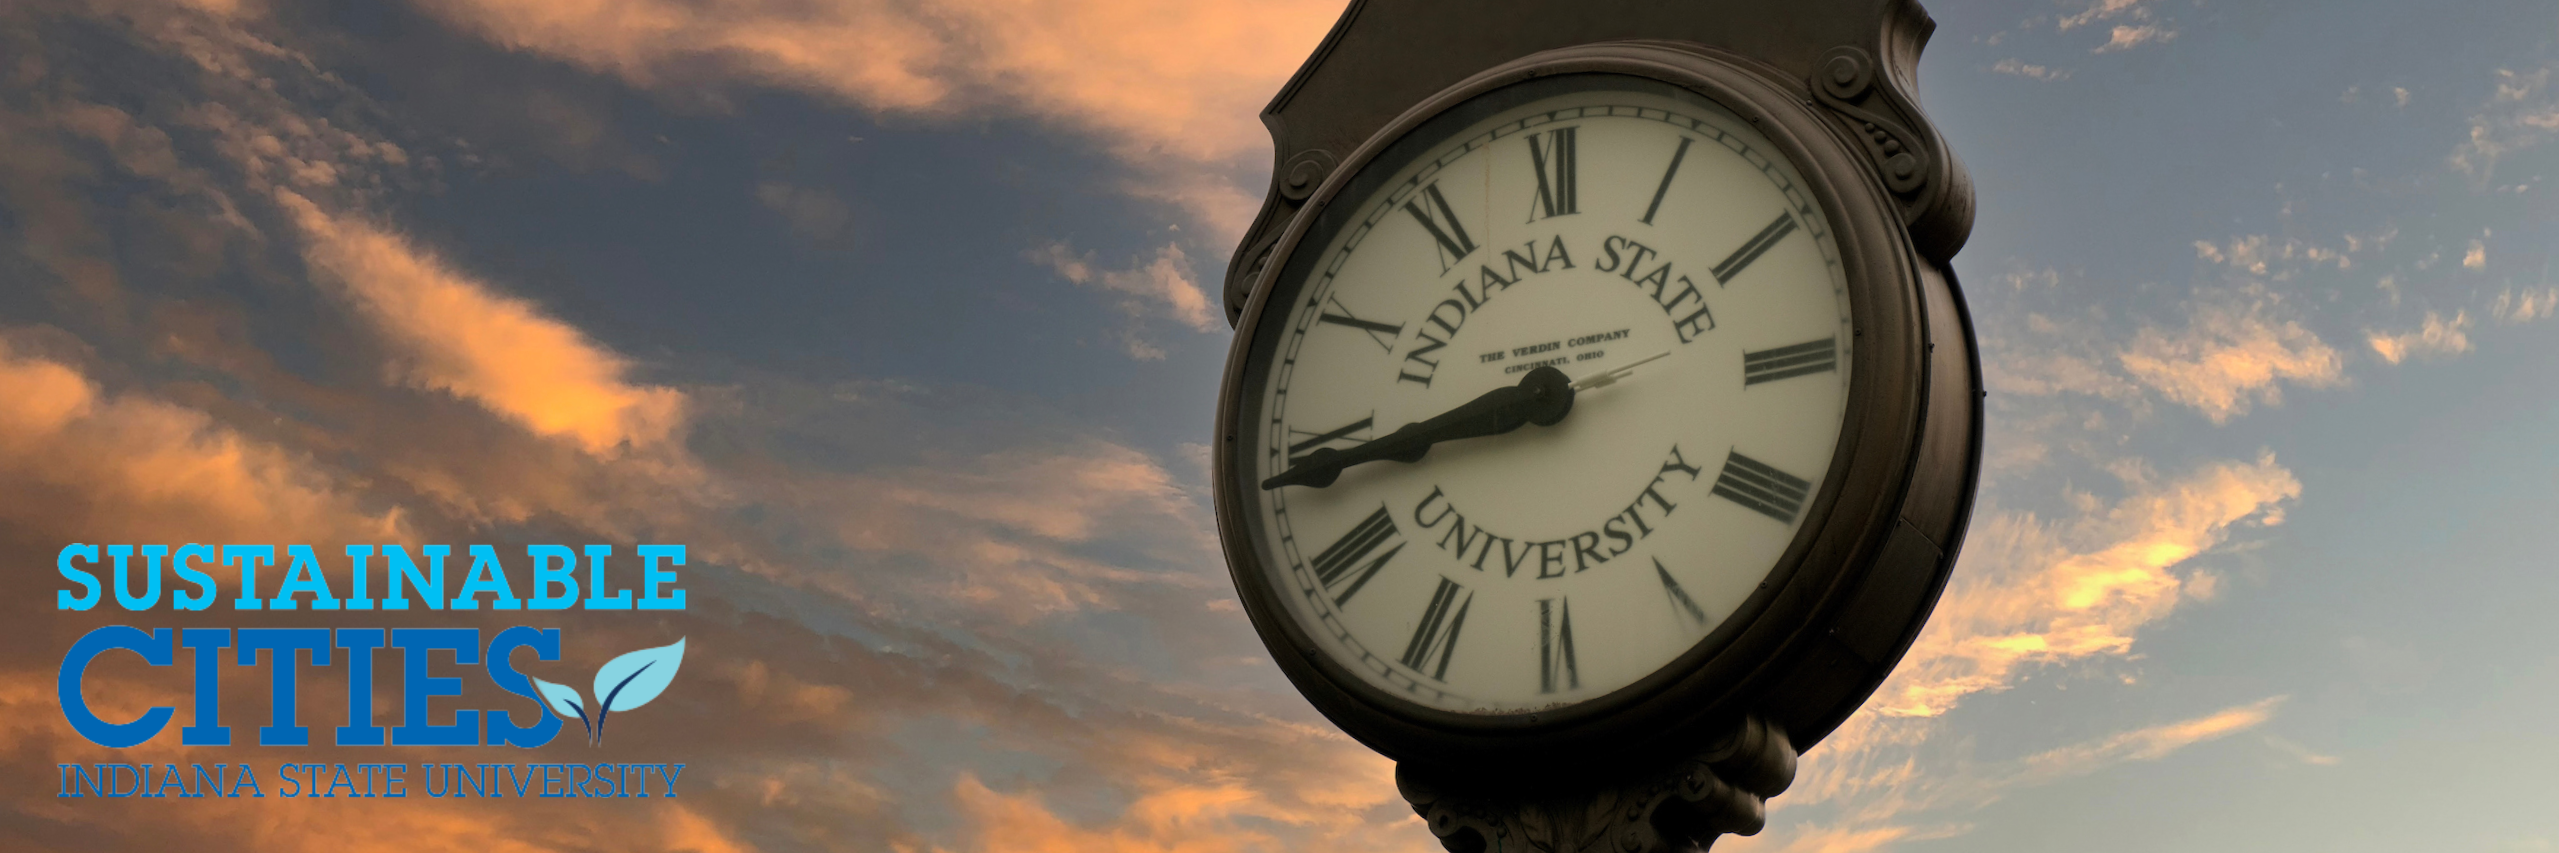 An image of the alumni clock and a cloudy sunset background with the Sustainable Cities logo in the bottom left corner